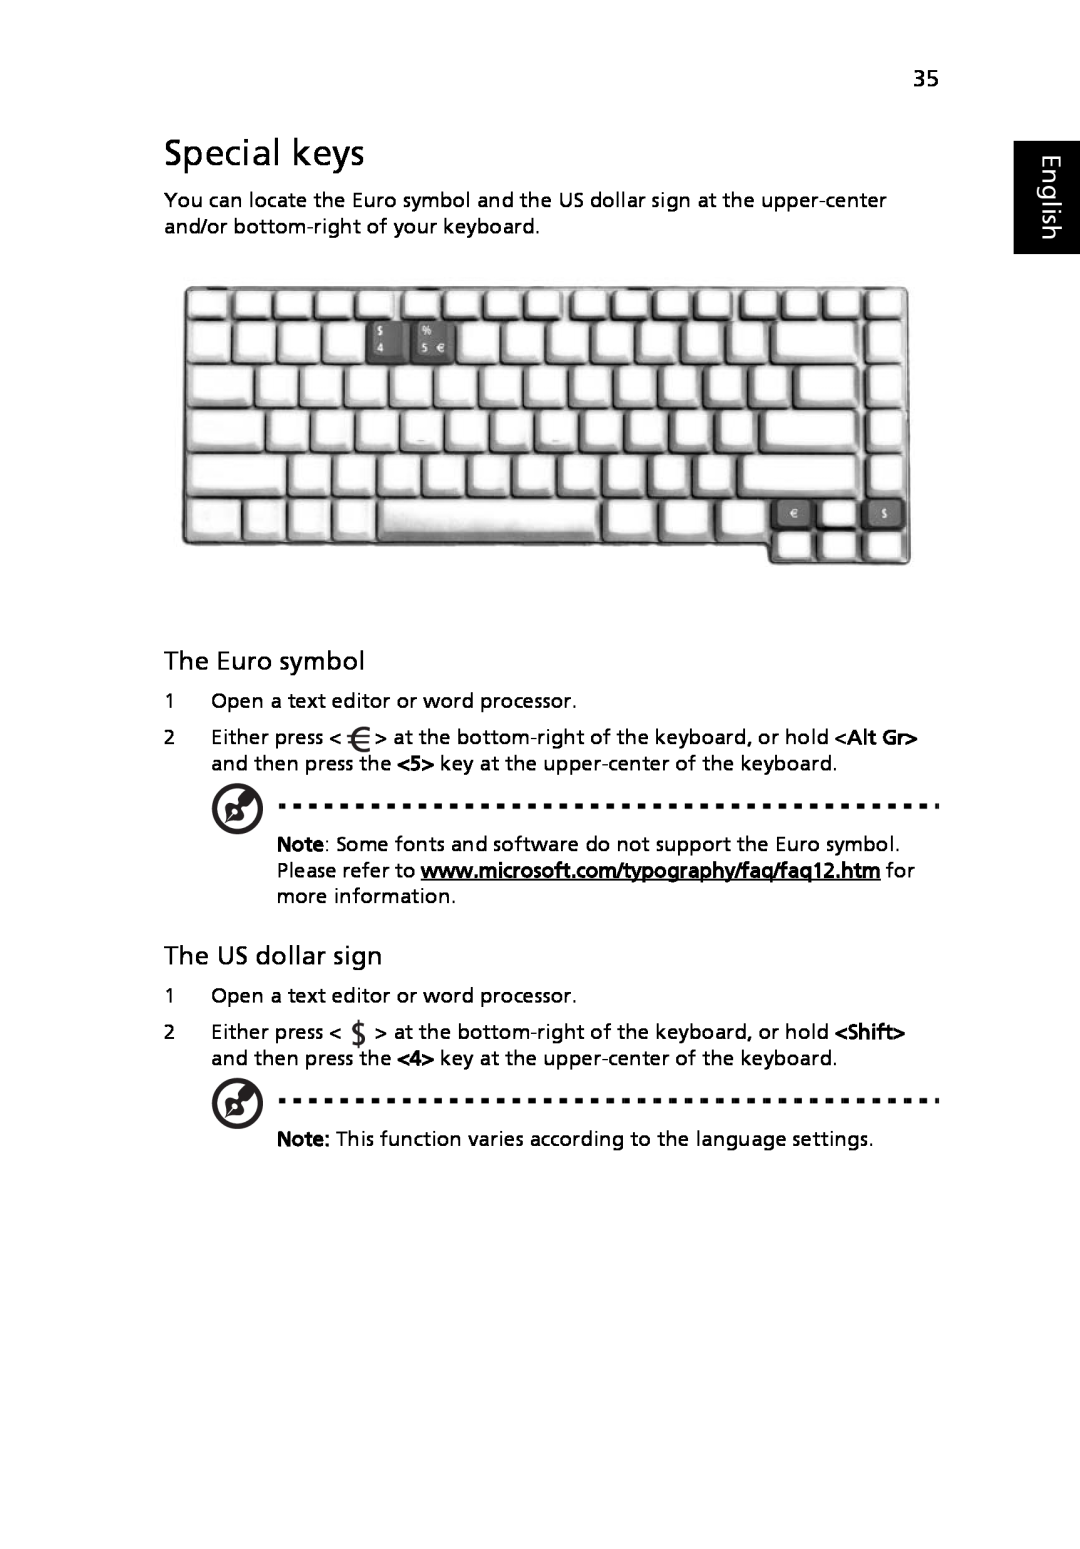 Acer 5010 Series, 5410 Series manual Special keys, The Euro symbol, The US dollar sign, English 